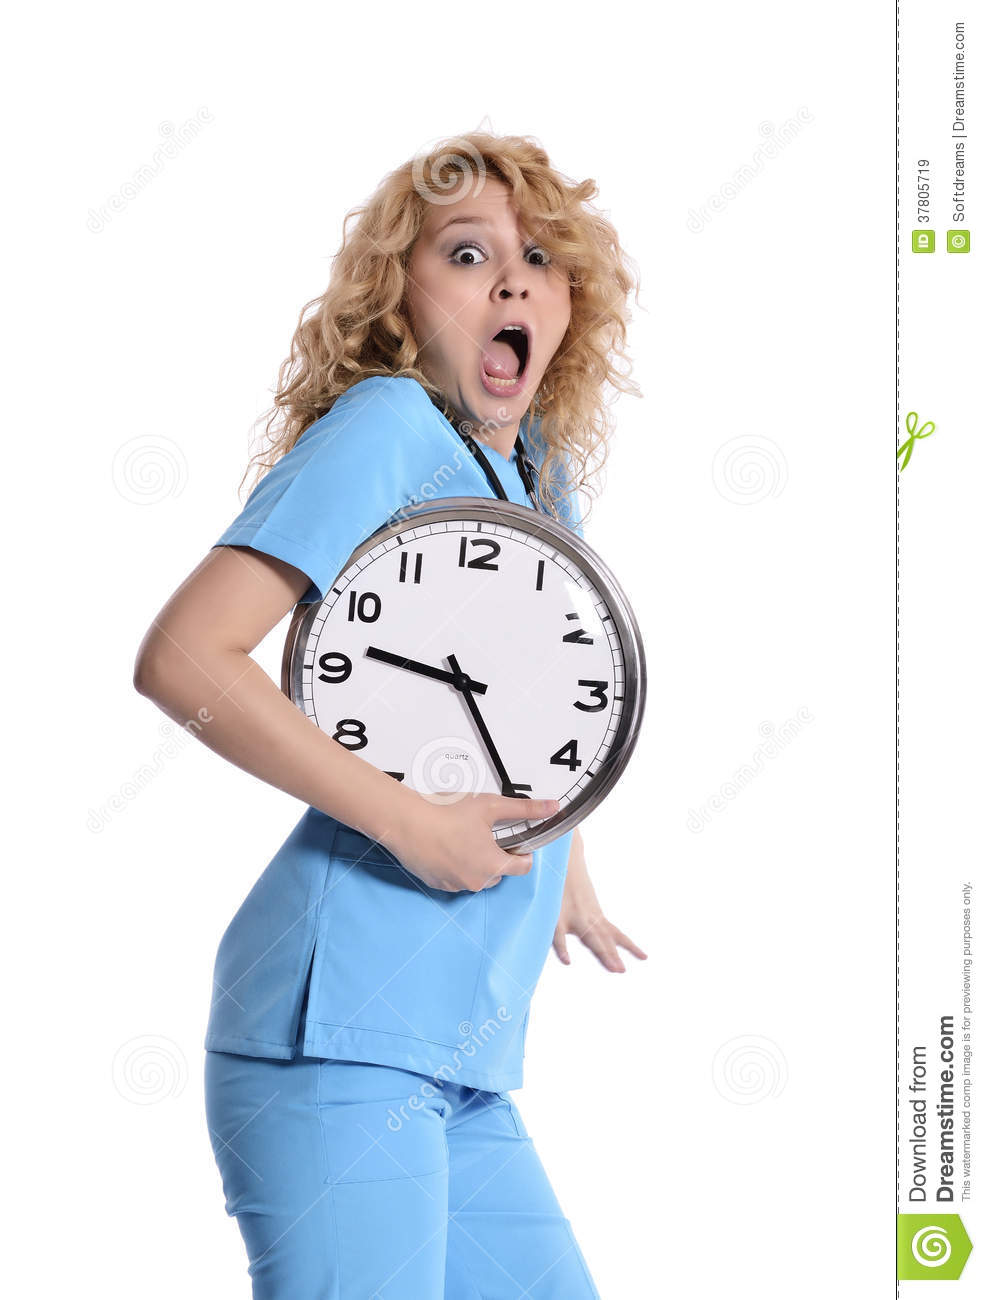 Stress   Nurse Woman Running Late With Clock Under Her Arm  Healthcare